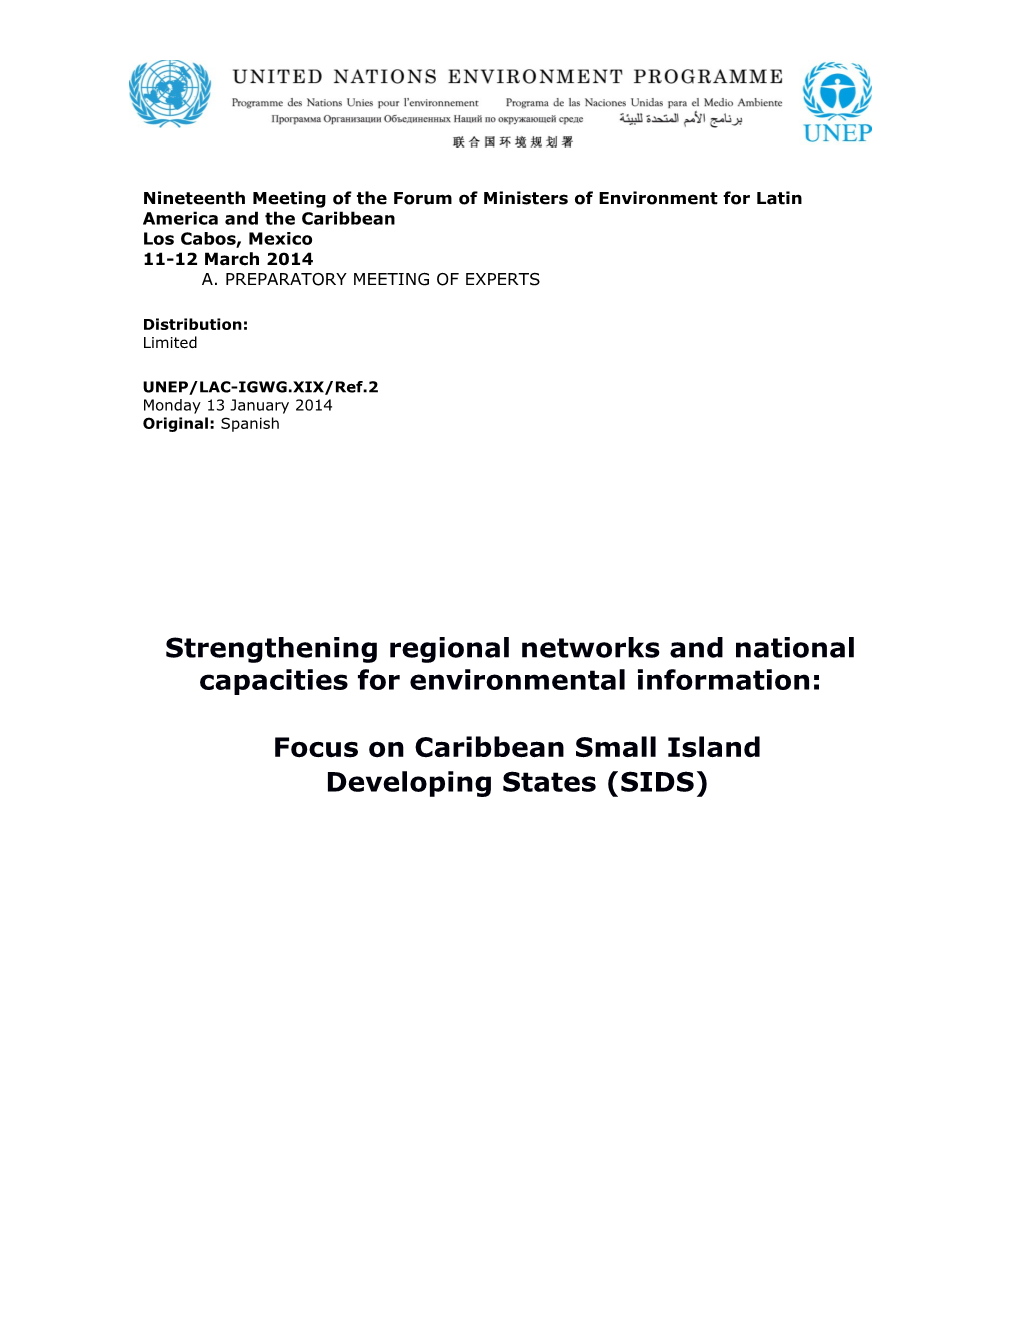 Strengthening Regional Networks and National Capacities for Environmental Information